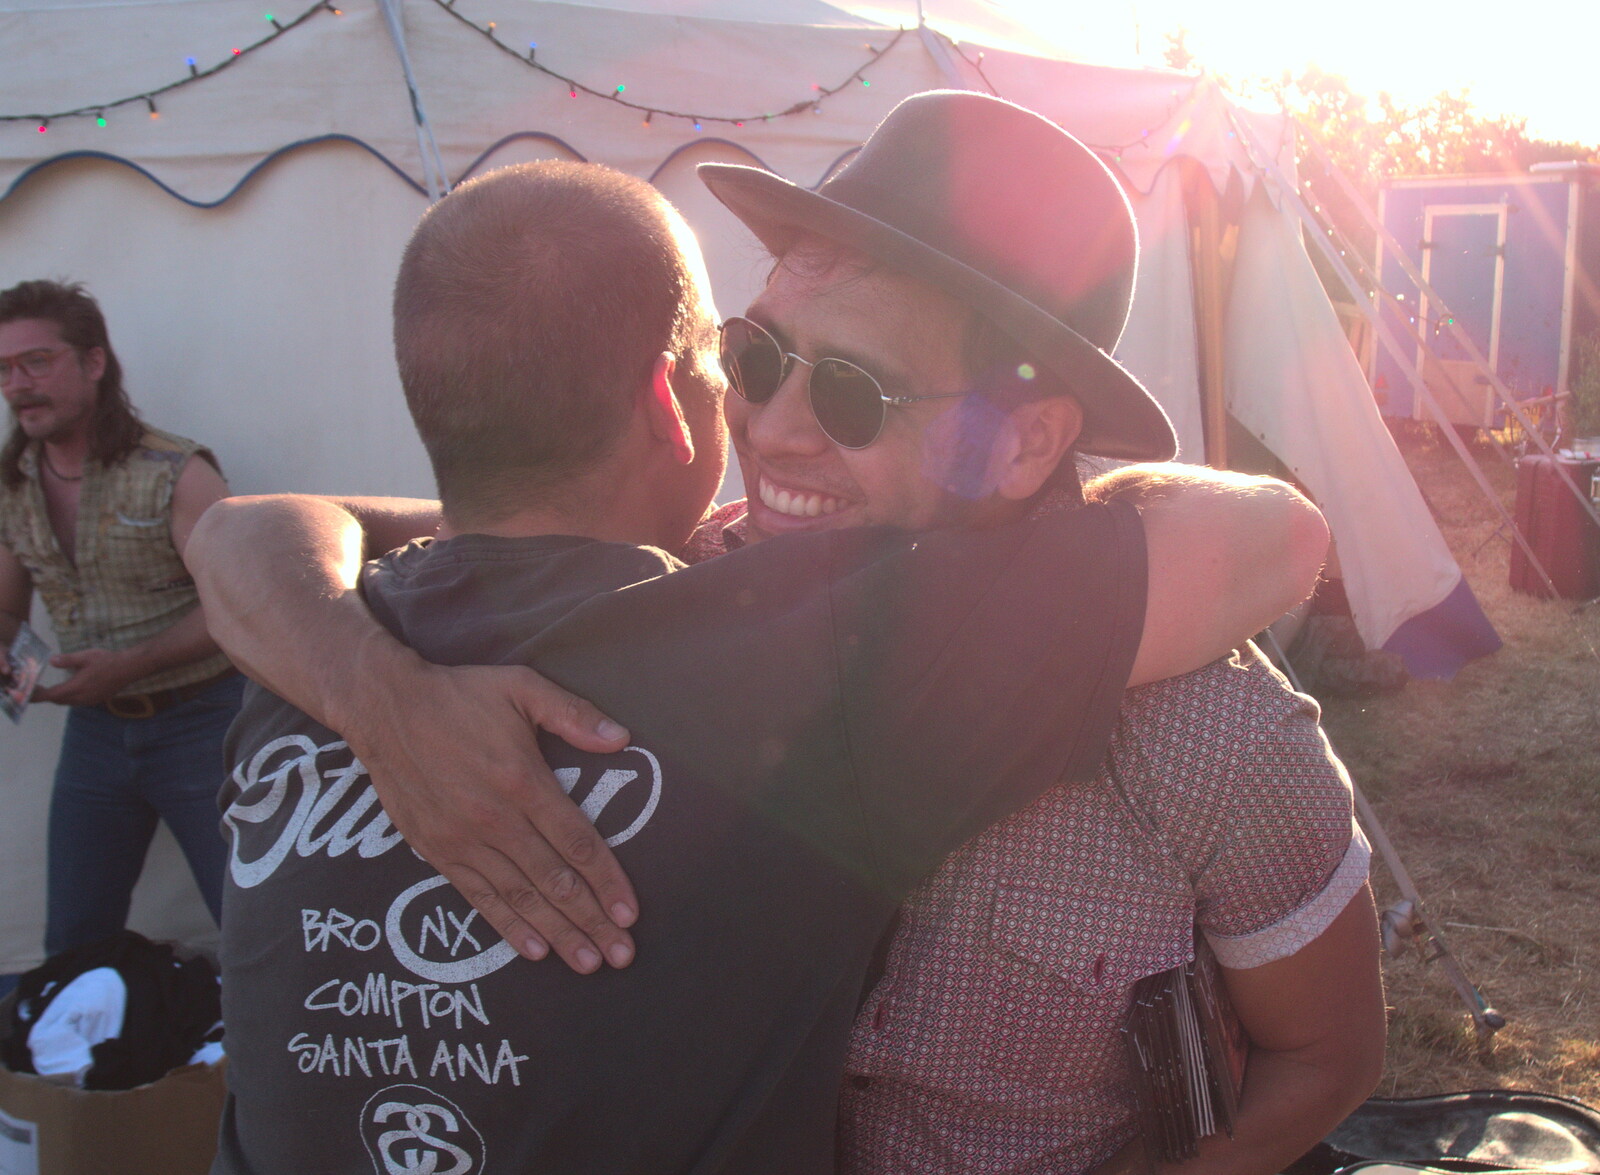 Ed gives a hug from WoW Festival, Burston, Norfolk - 29th June - 1st July 2018